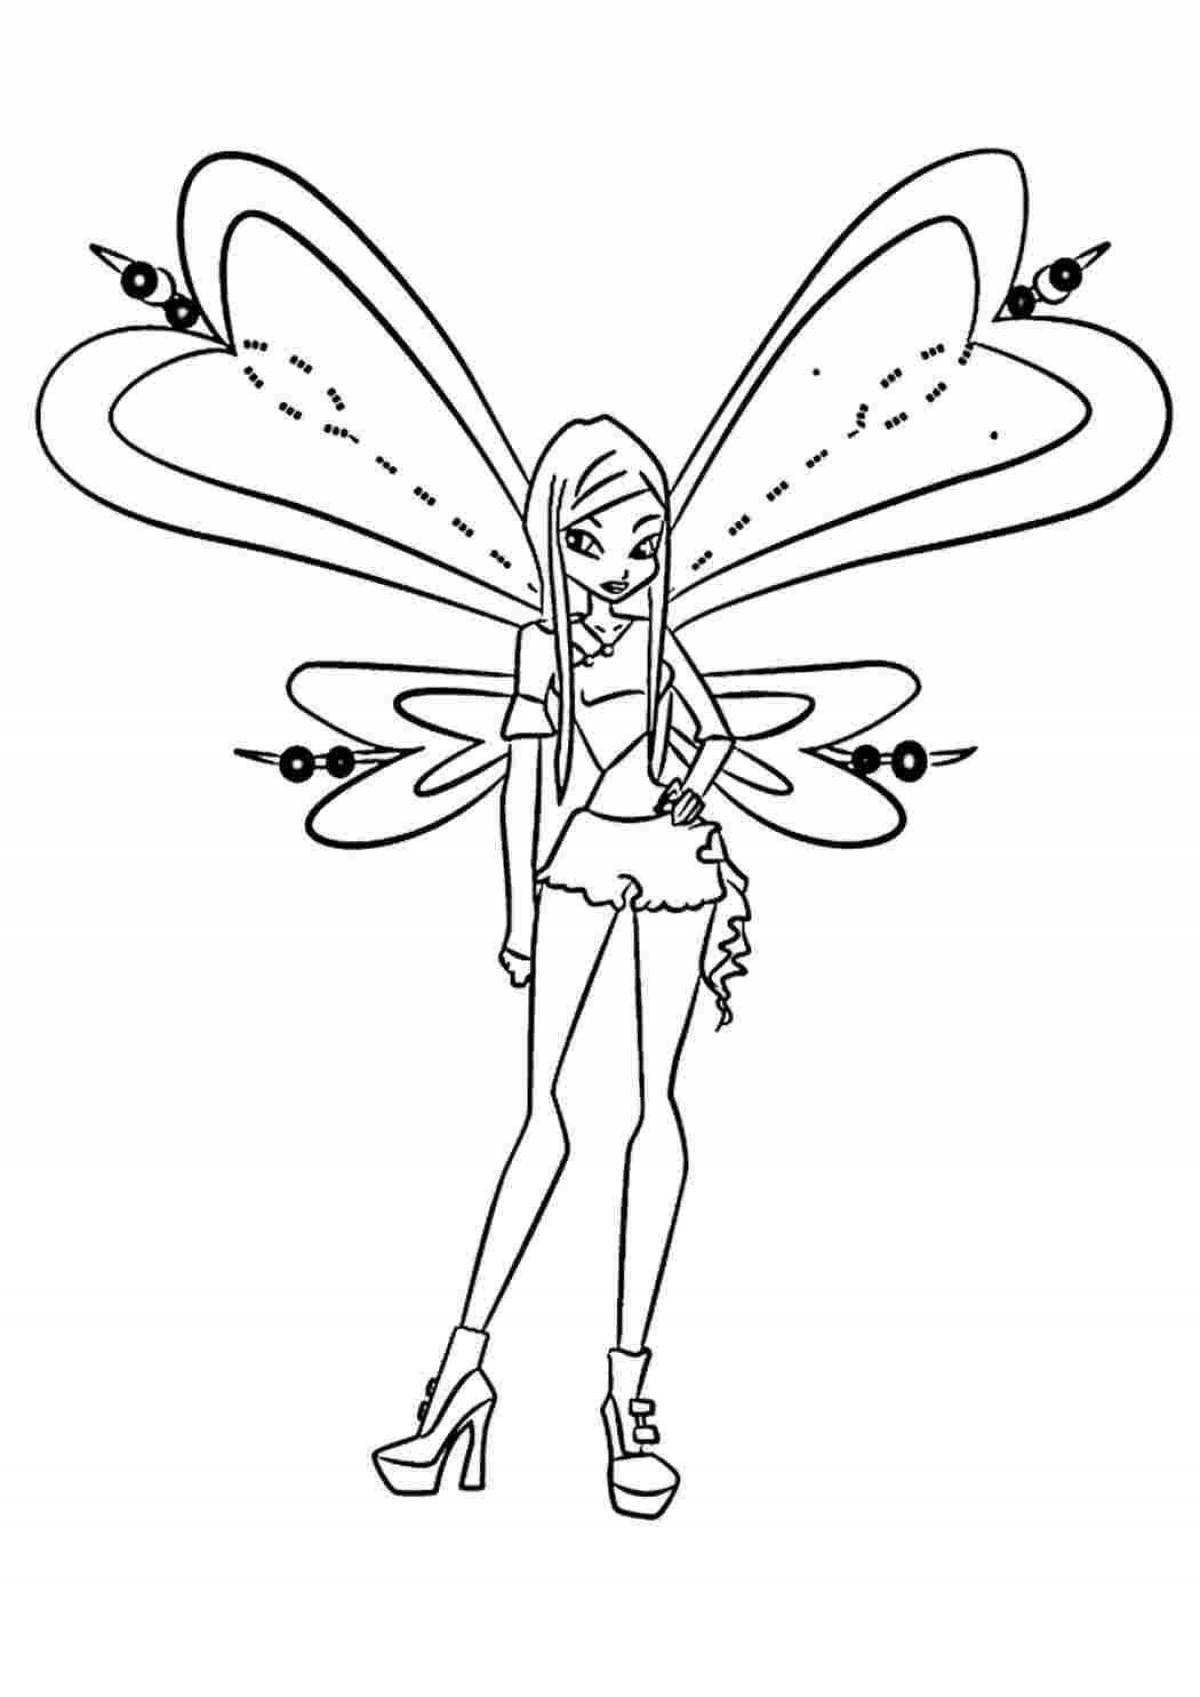 Awesome winx tecna believix coloring page